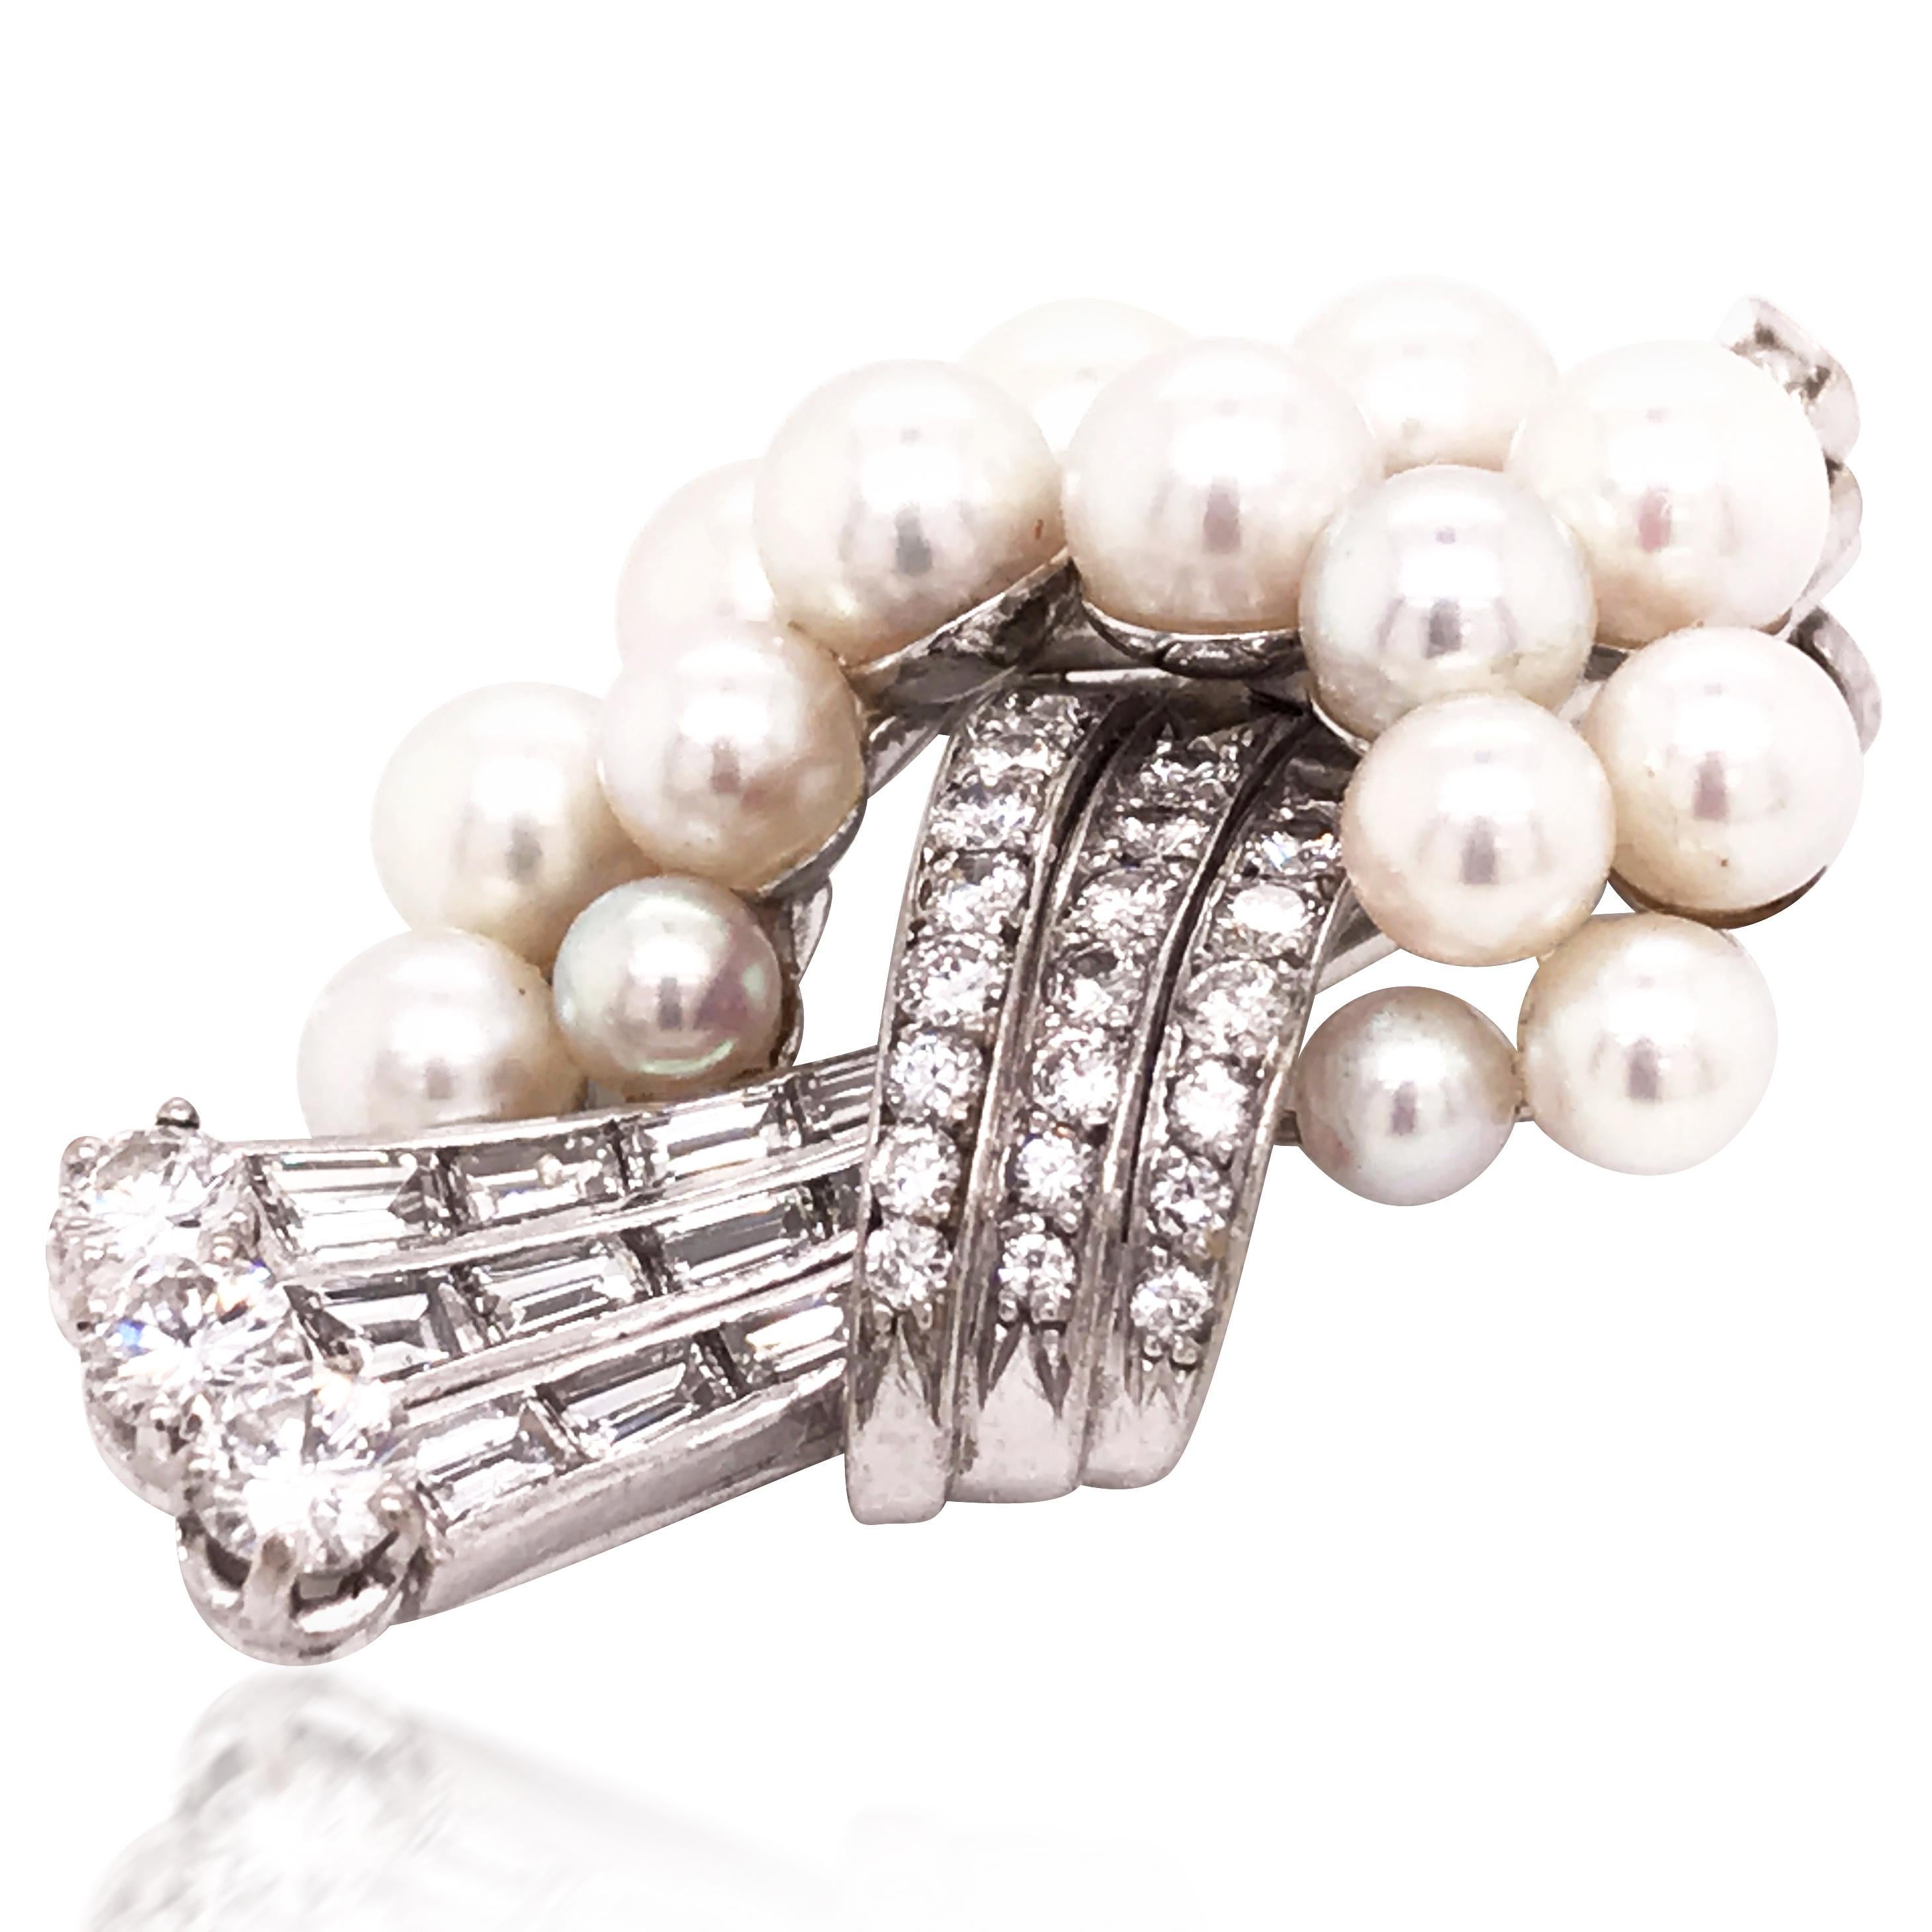 The brooch is circa 1950, composed of cultured pearls and a line of brilliant and baguette-cut diamonds.

Stamp: Swiss assay work and monogrammed.
Weight: 10.9 grams
Measurement: 3.8 x 2.4cm